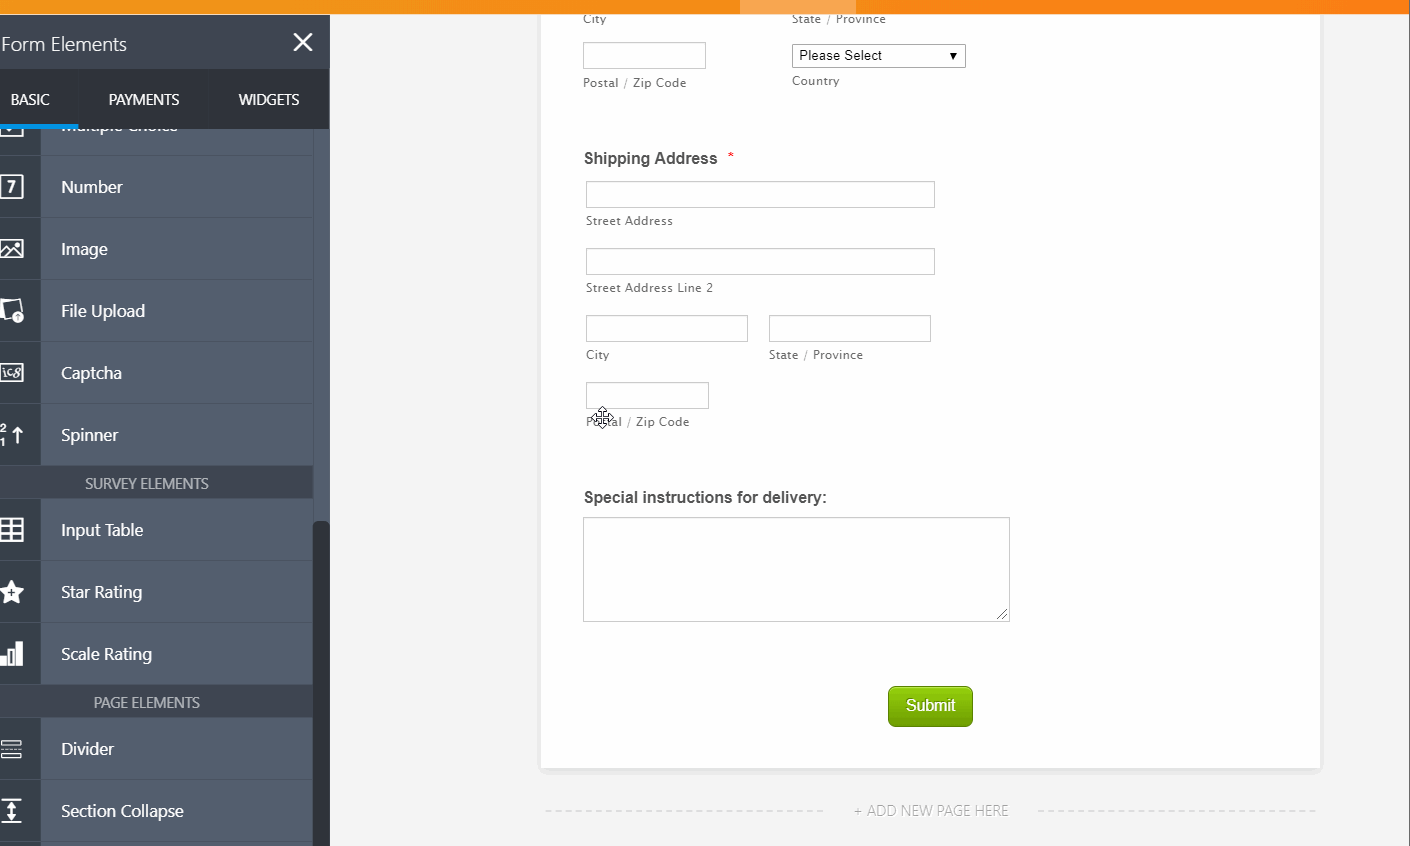 Can I set up my form so that it goes through multiple pages?